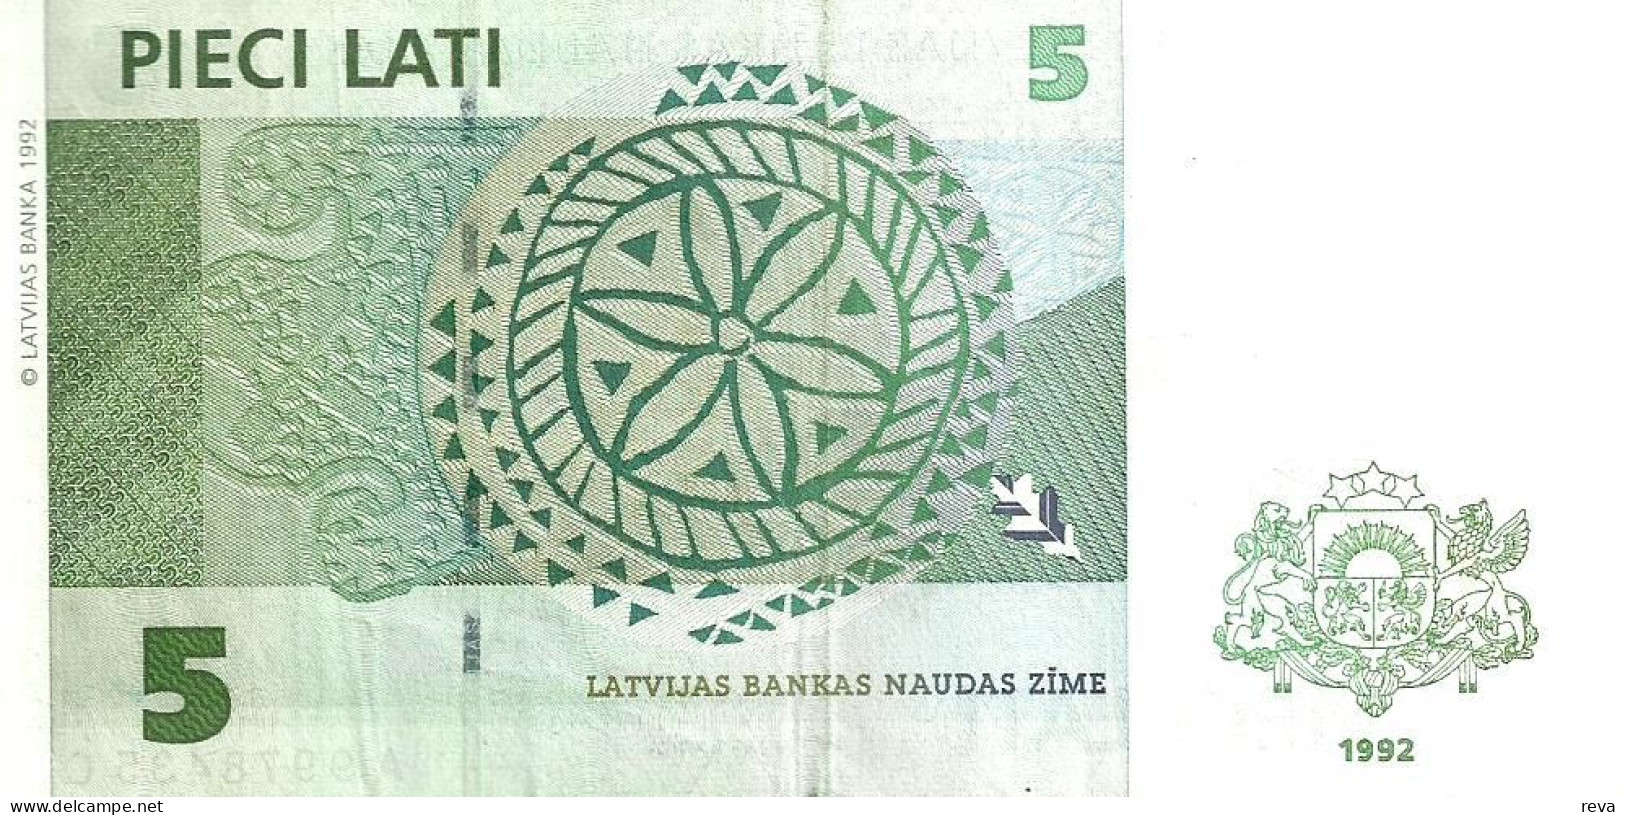 LATVIA  5 LATI GREEN TREE FRONT & ABSTRACT DESING BACK DATED 1992 VF+/VF+ P.43a READ DESCRIPTION !! - Letland